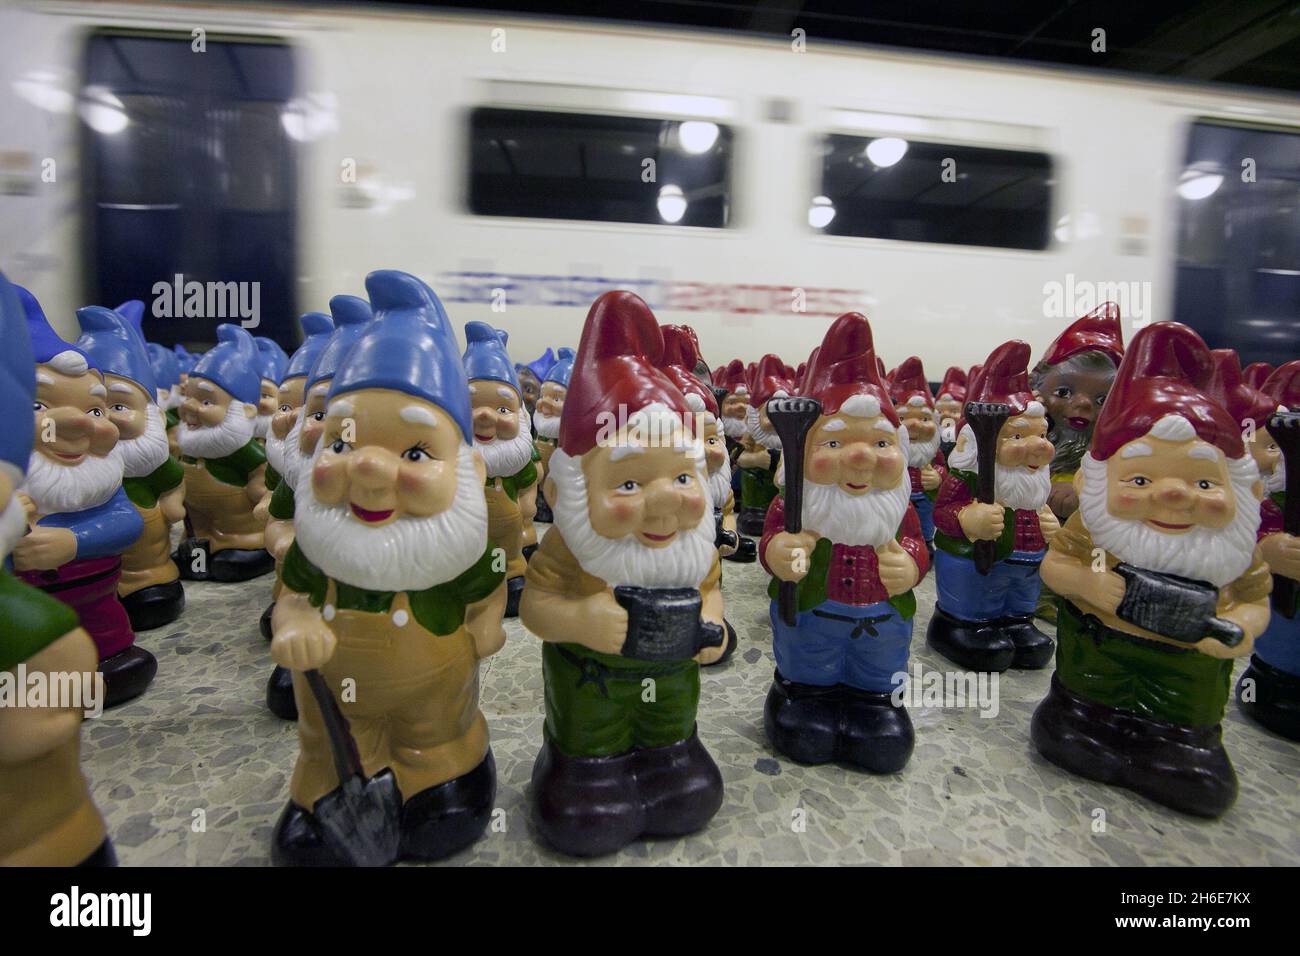 WORLD'S FIRST EVER GNOME FLASH MOB- Thousands of gnomes descend on  Liverpool Street Station to celebrate the release of Gnomeo & Juliet 3D, in  cinemas 11th February 2011, with Gnome Flash Mob.